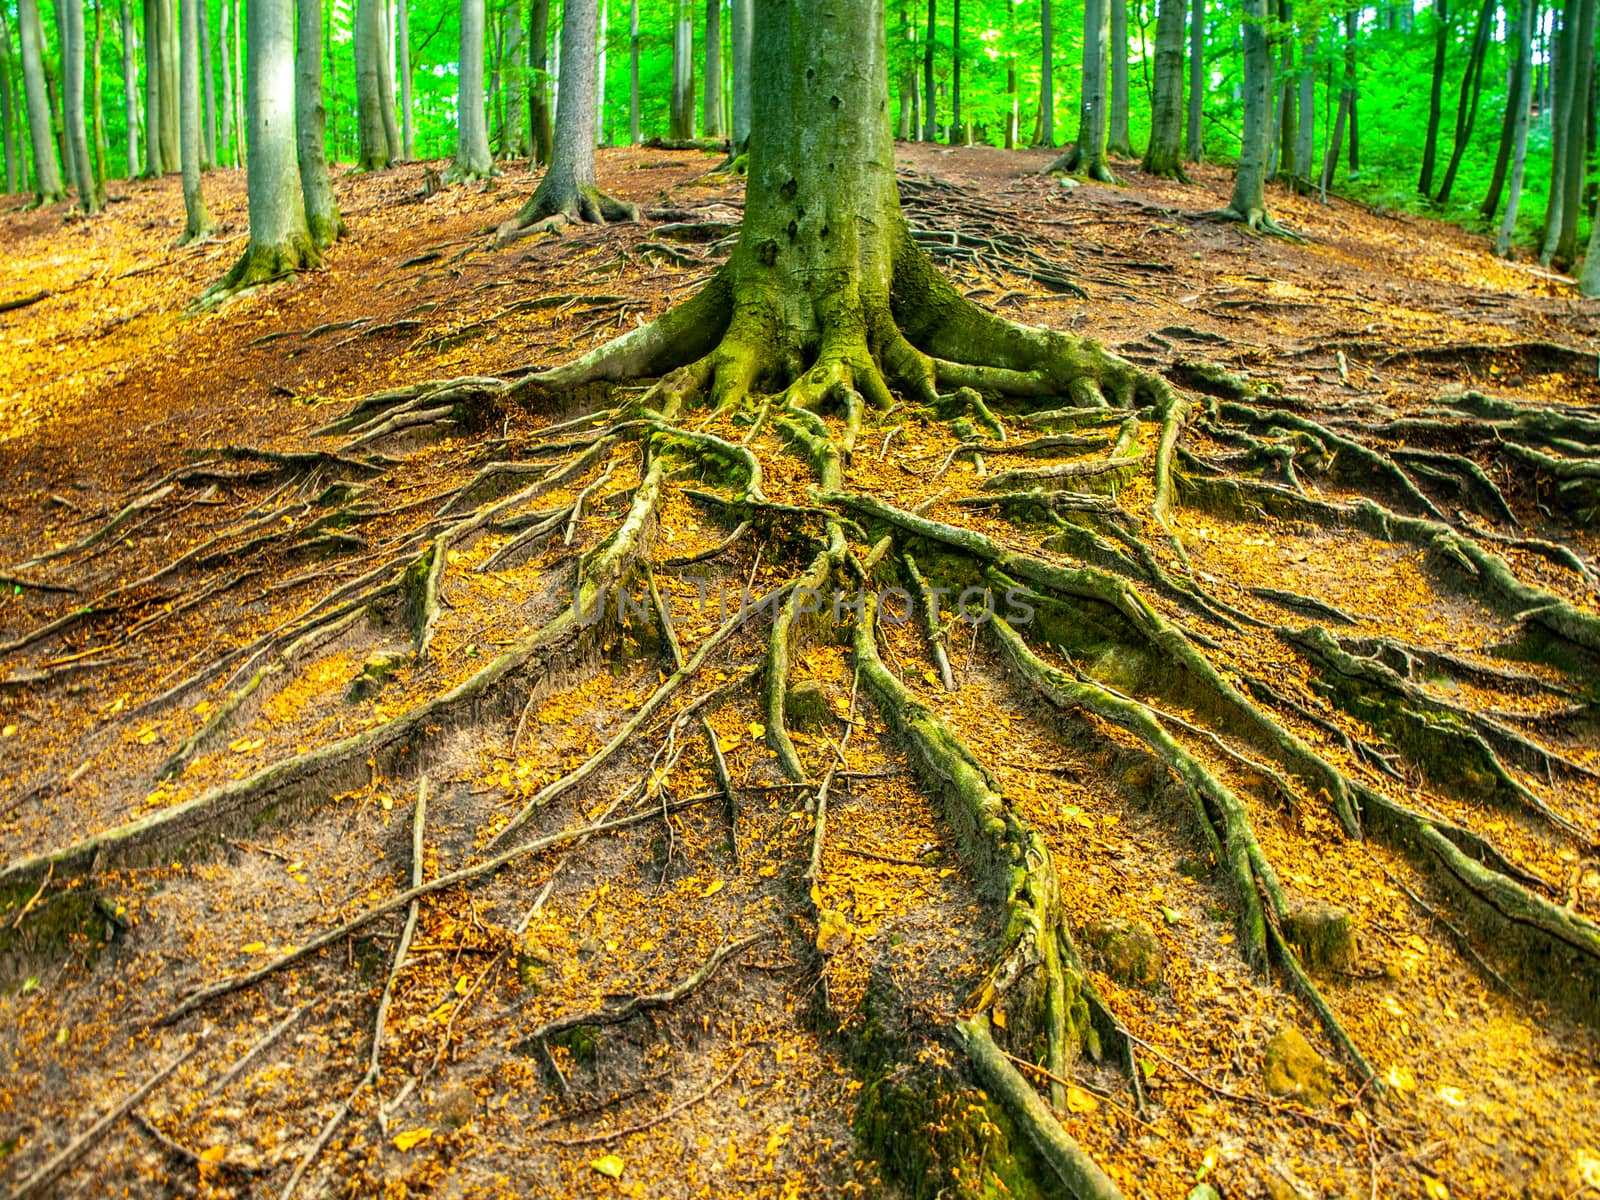 Intricate root system in the spring beech forest.